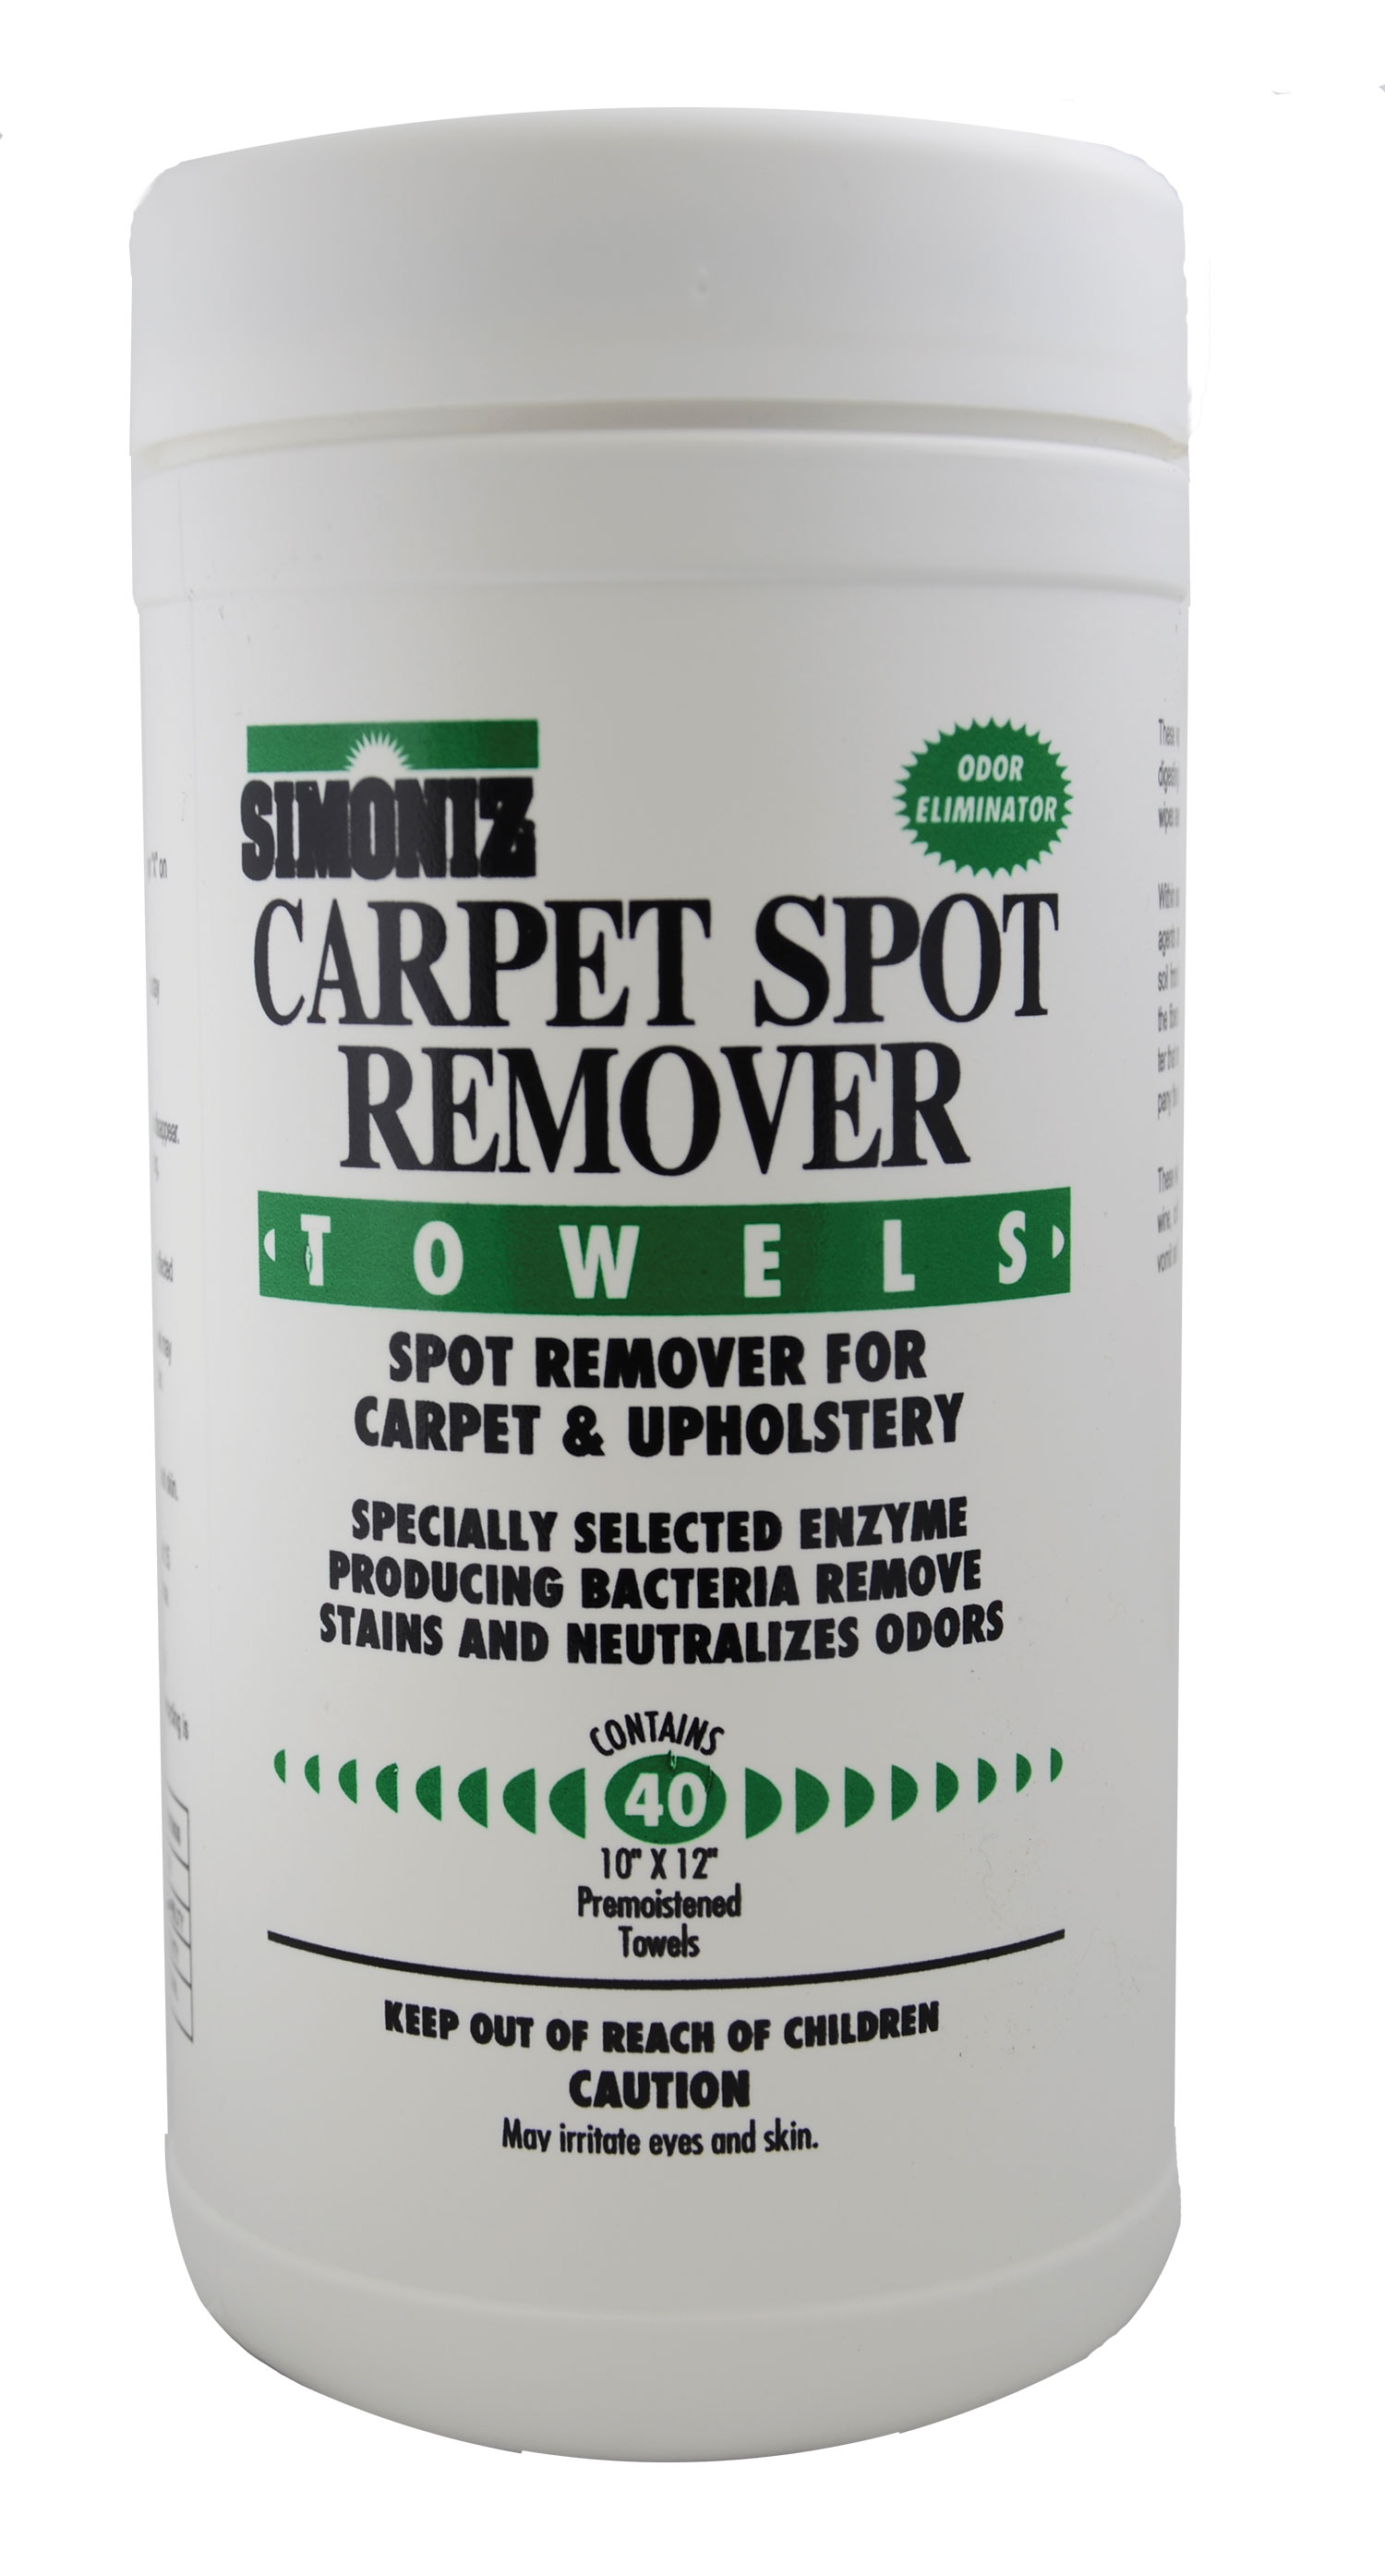 White Wizard Spot Remover All Purpose Cleaner Clothes Carpet